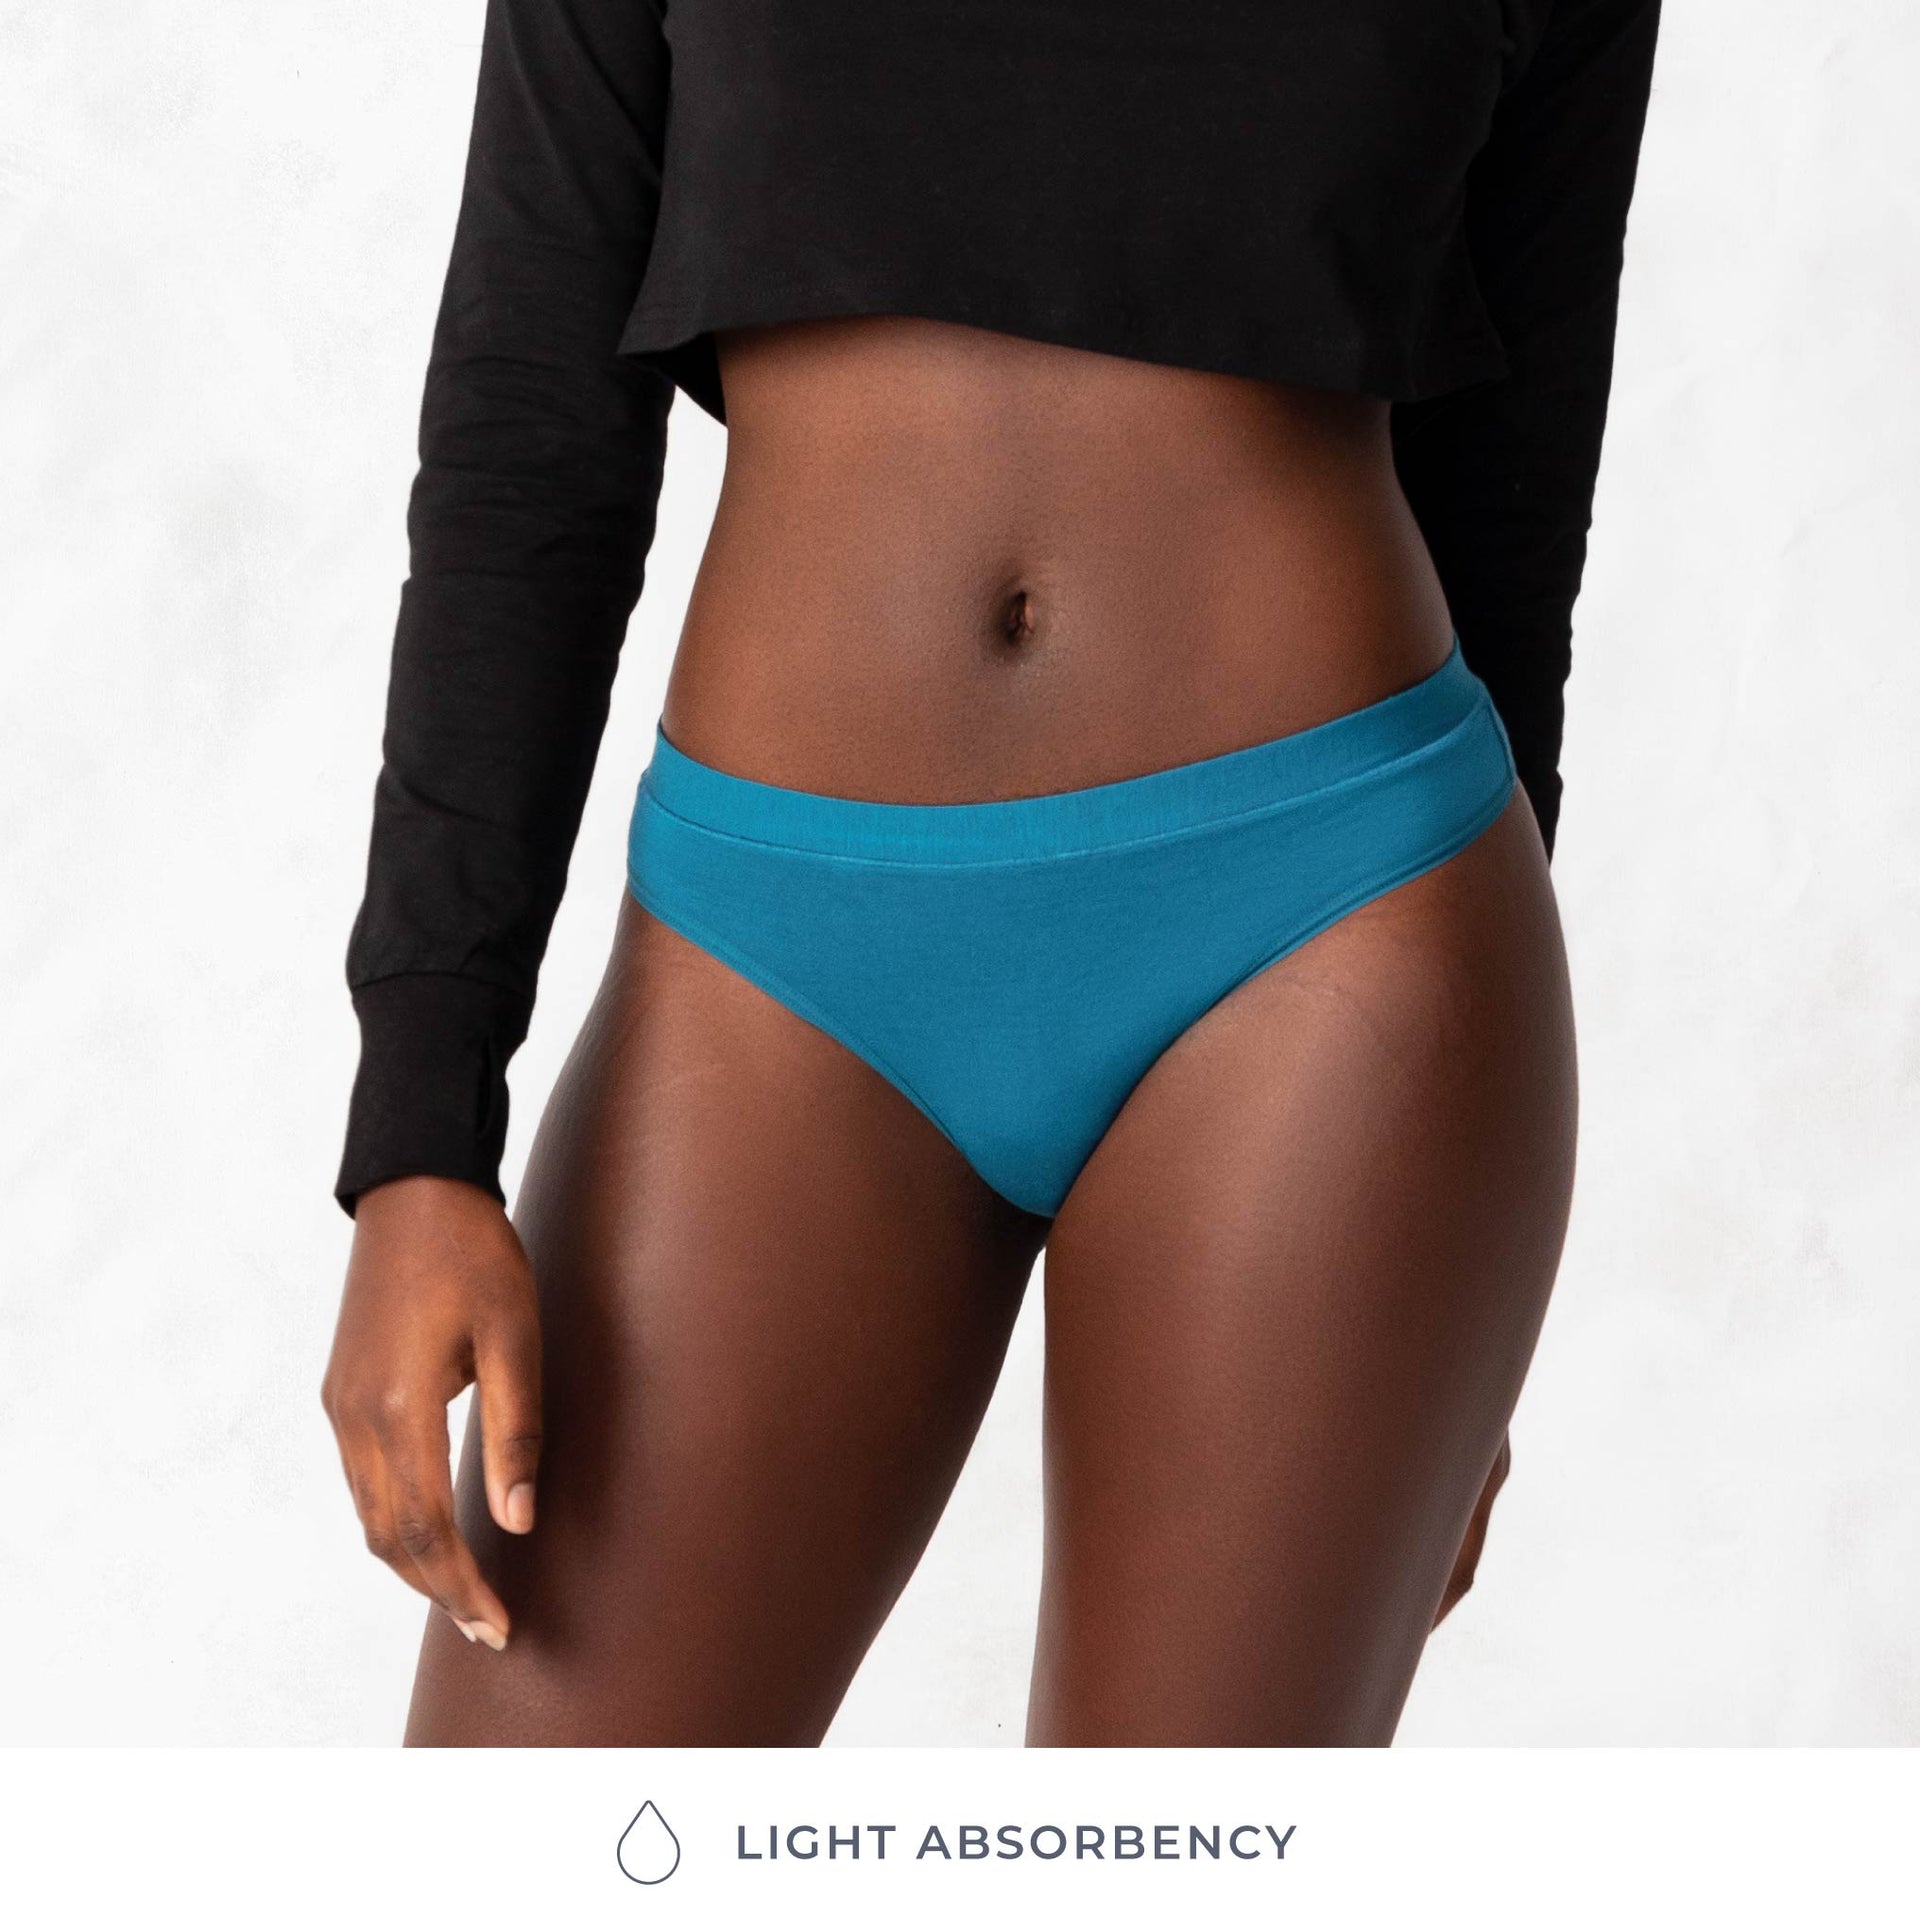 The Best Wide Gusset Panties For A Comfortable Period